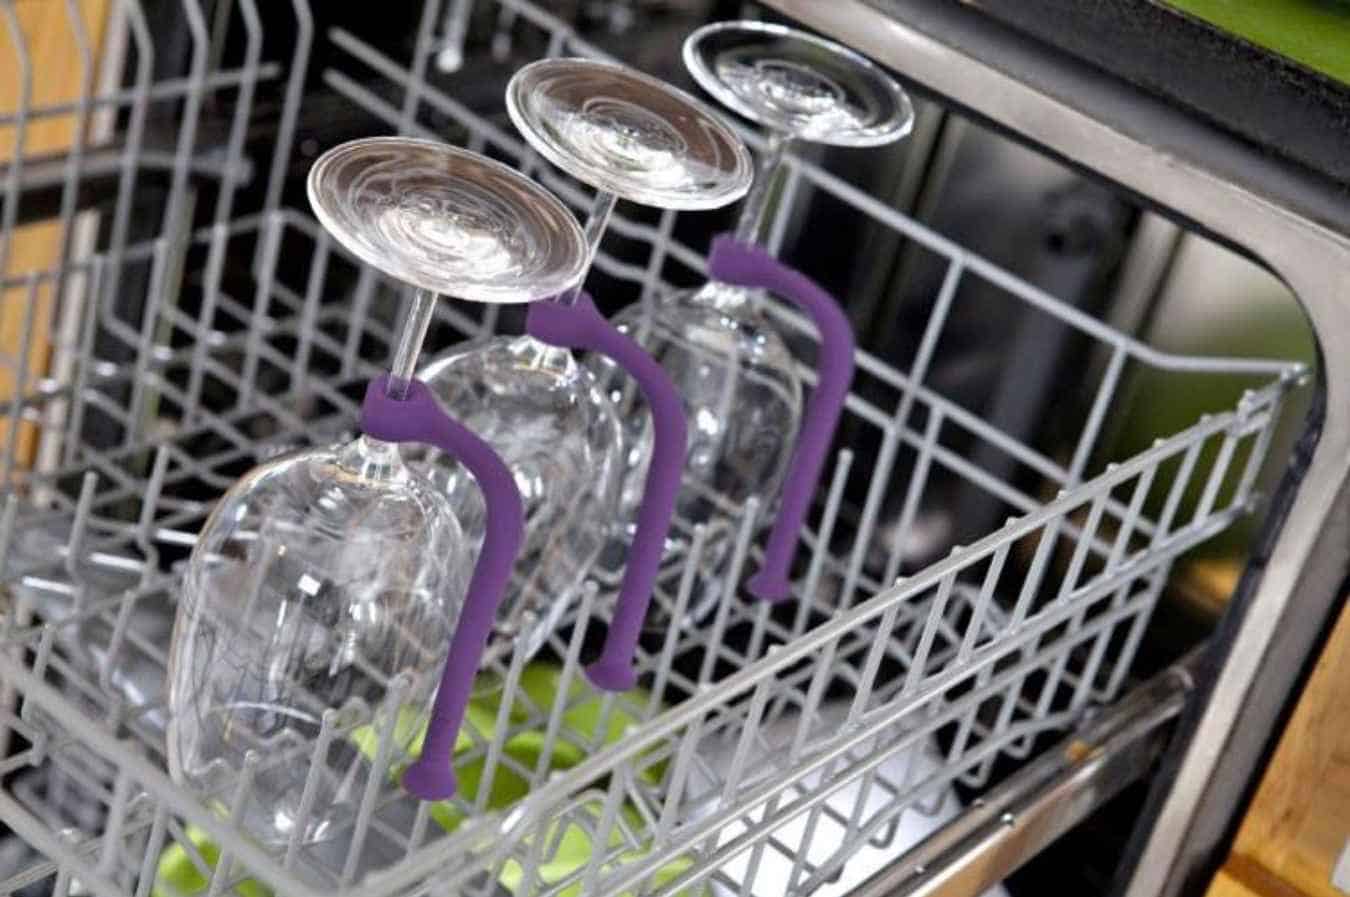 How to Clean your Wine Glasses Using the Dishwasher